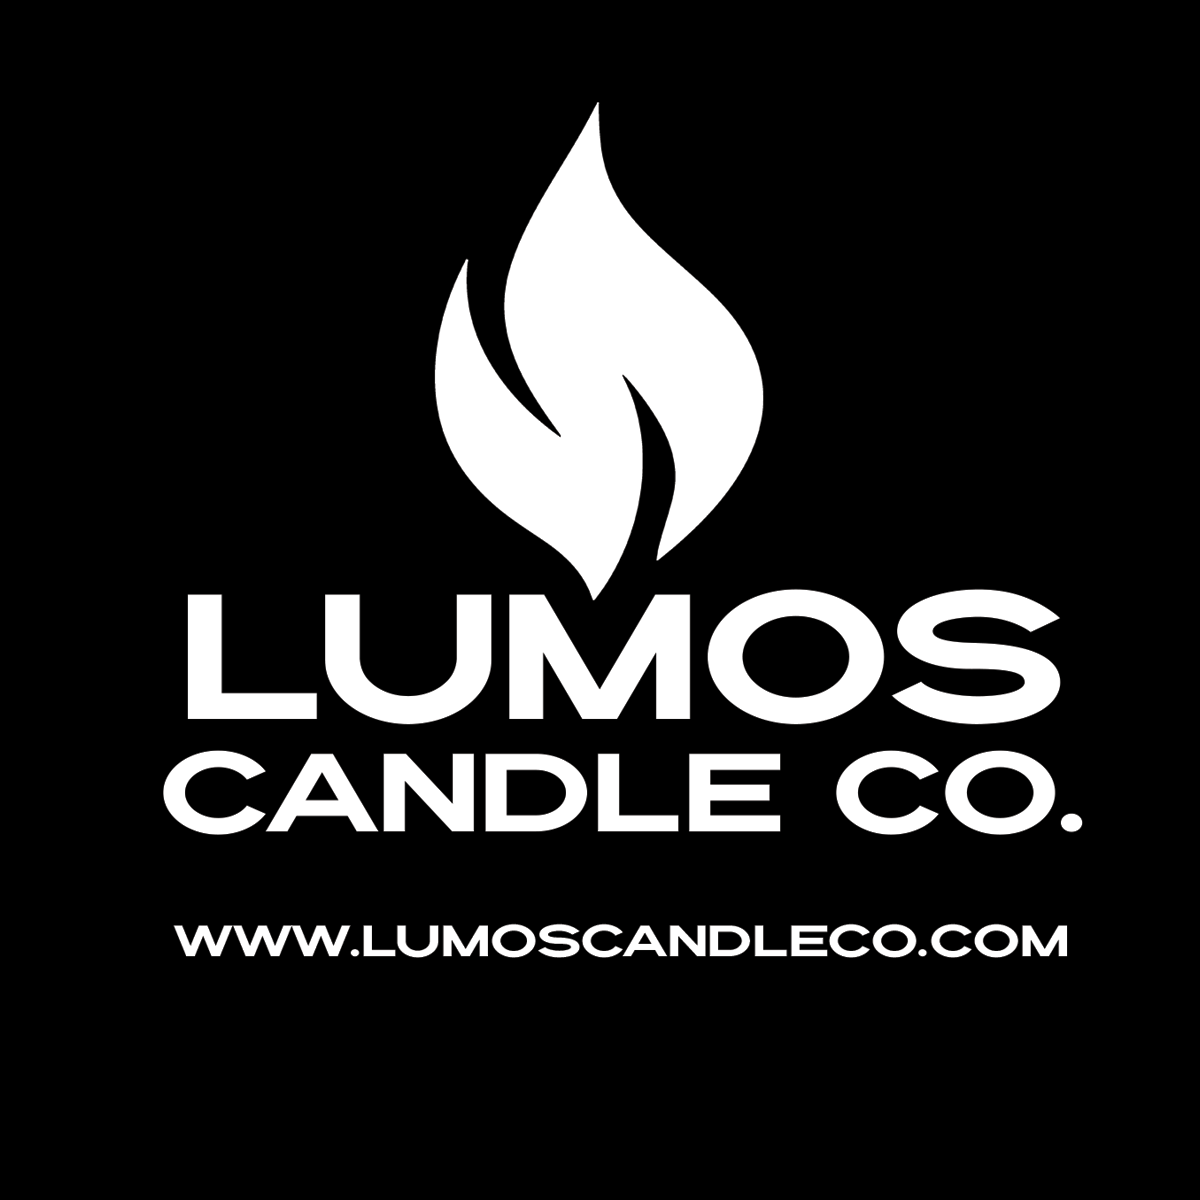 Why Burn Happy with Lumos Candle Co.?